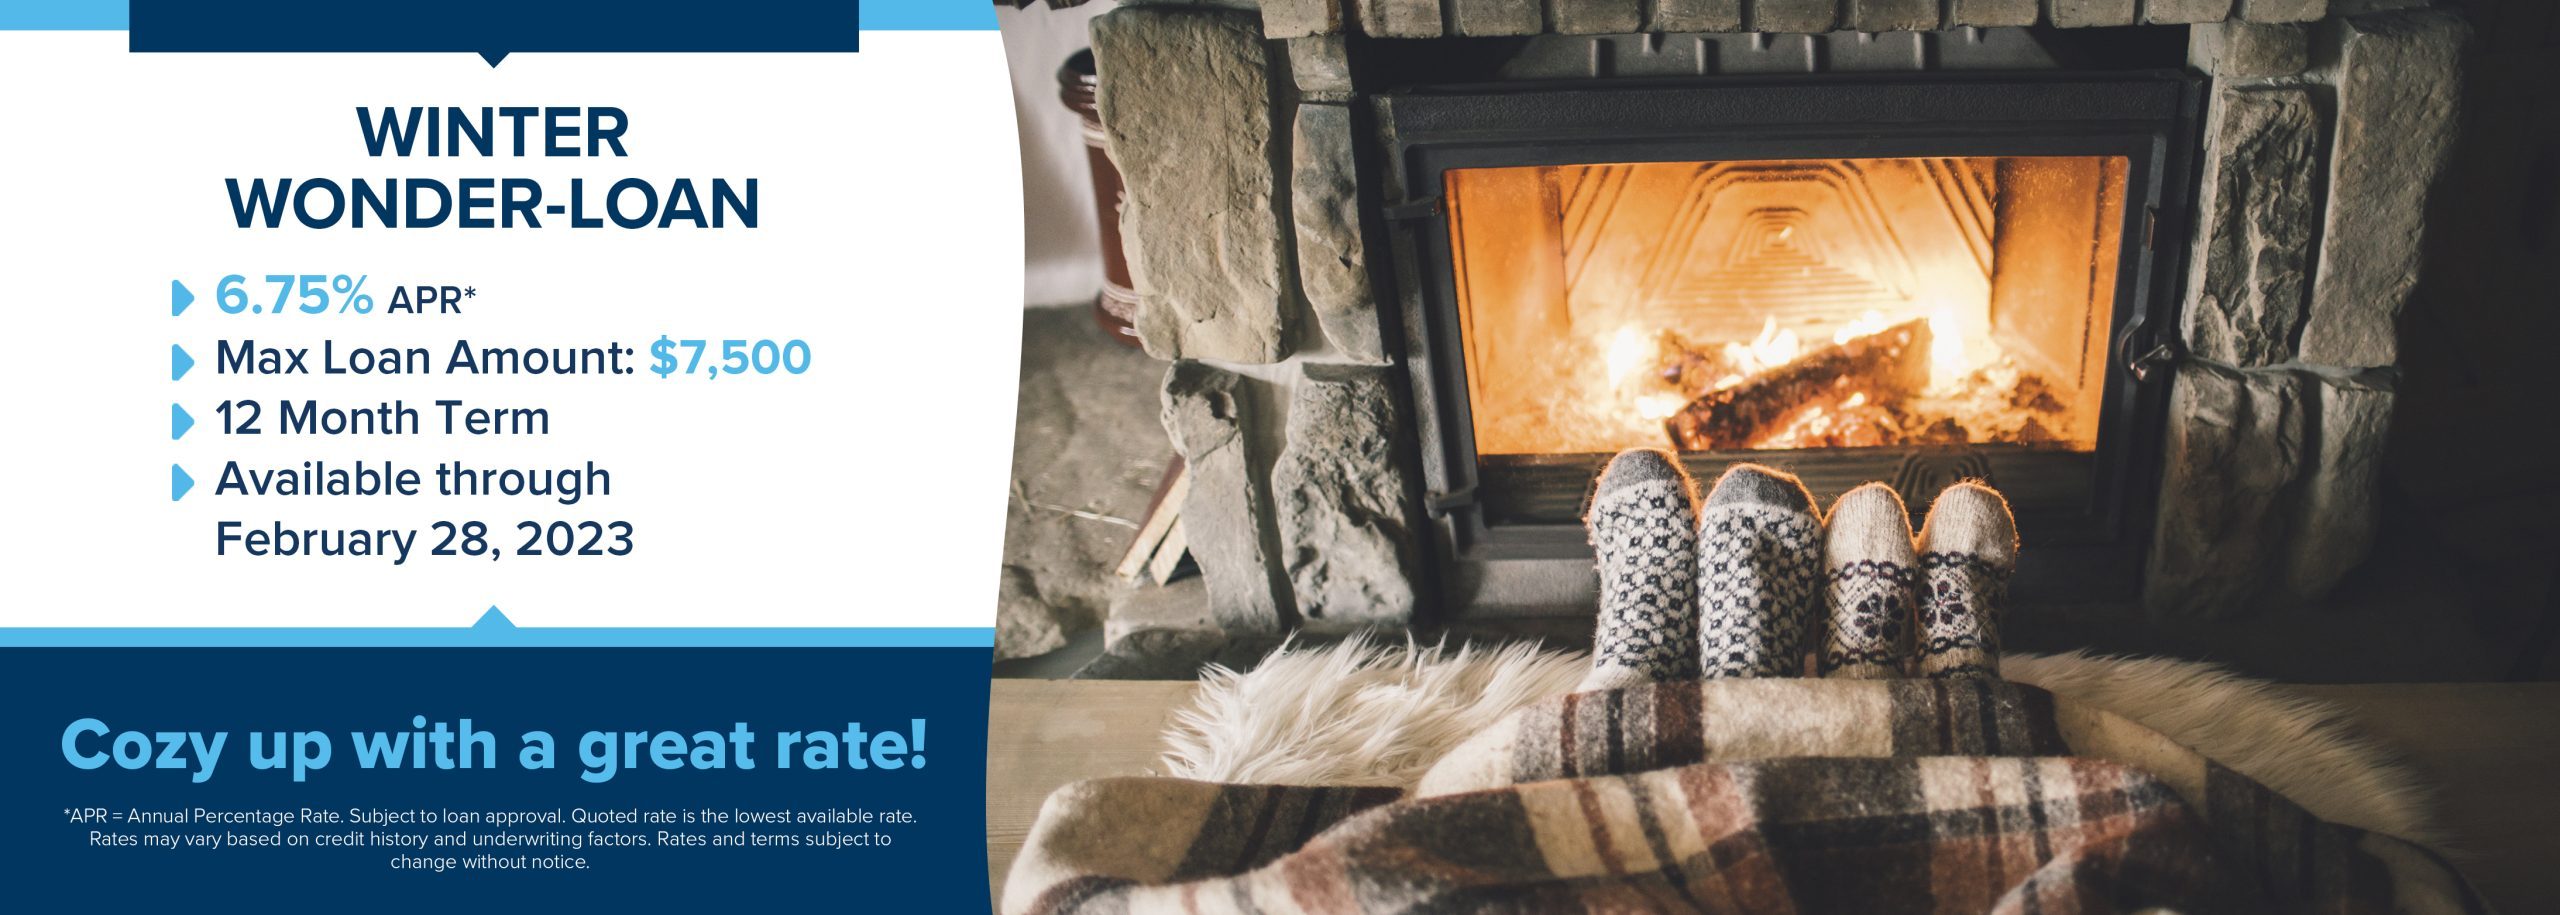 Image: cozy up to the fire, two pairs of cozy socks under a warm blanket. Text: Winter Wonder-Loan 6.75% APR*, max 12 month term, available through February 28, 2023. Cozy up to a great rate!